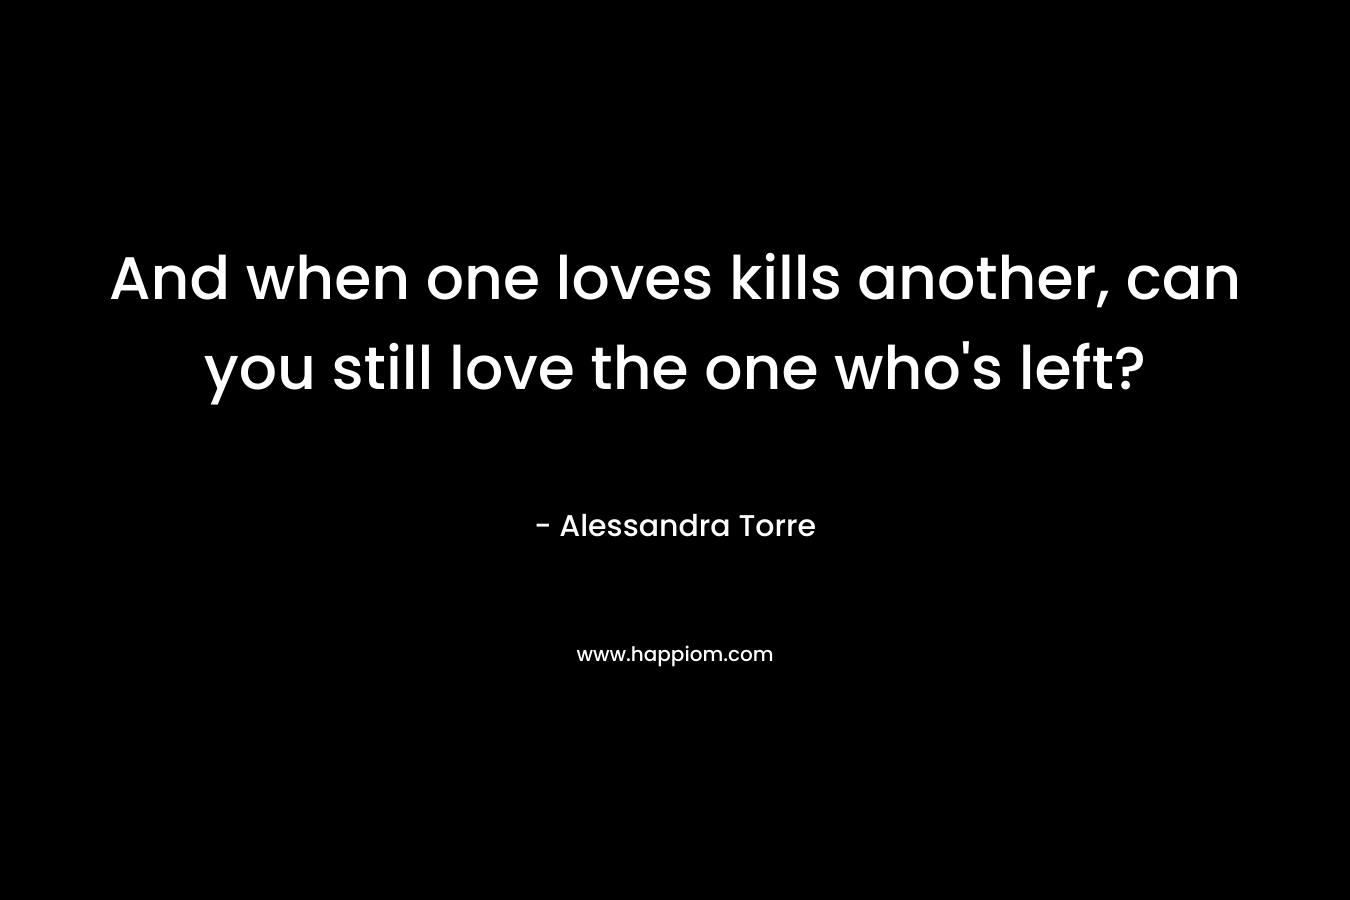 And when one loves kills another, can you still love the one who’s left? – Alessandra Torre